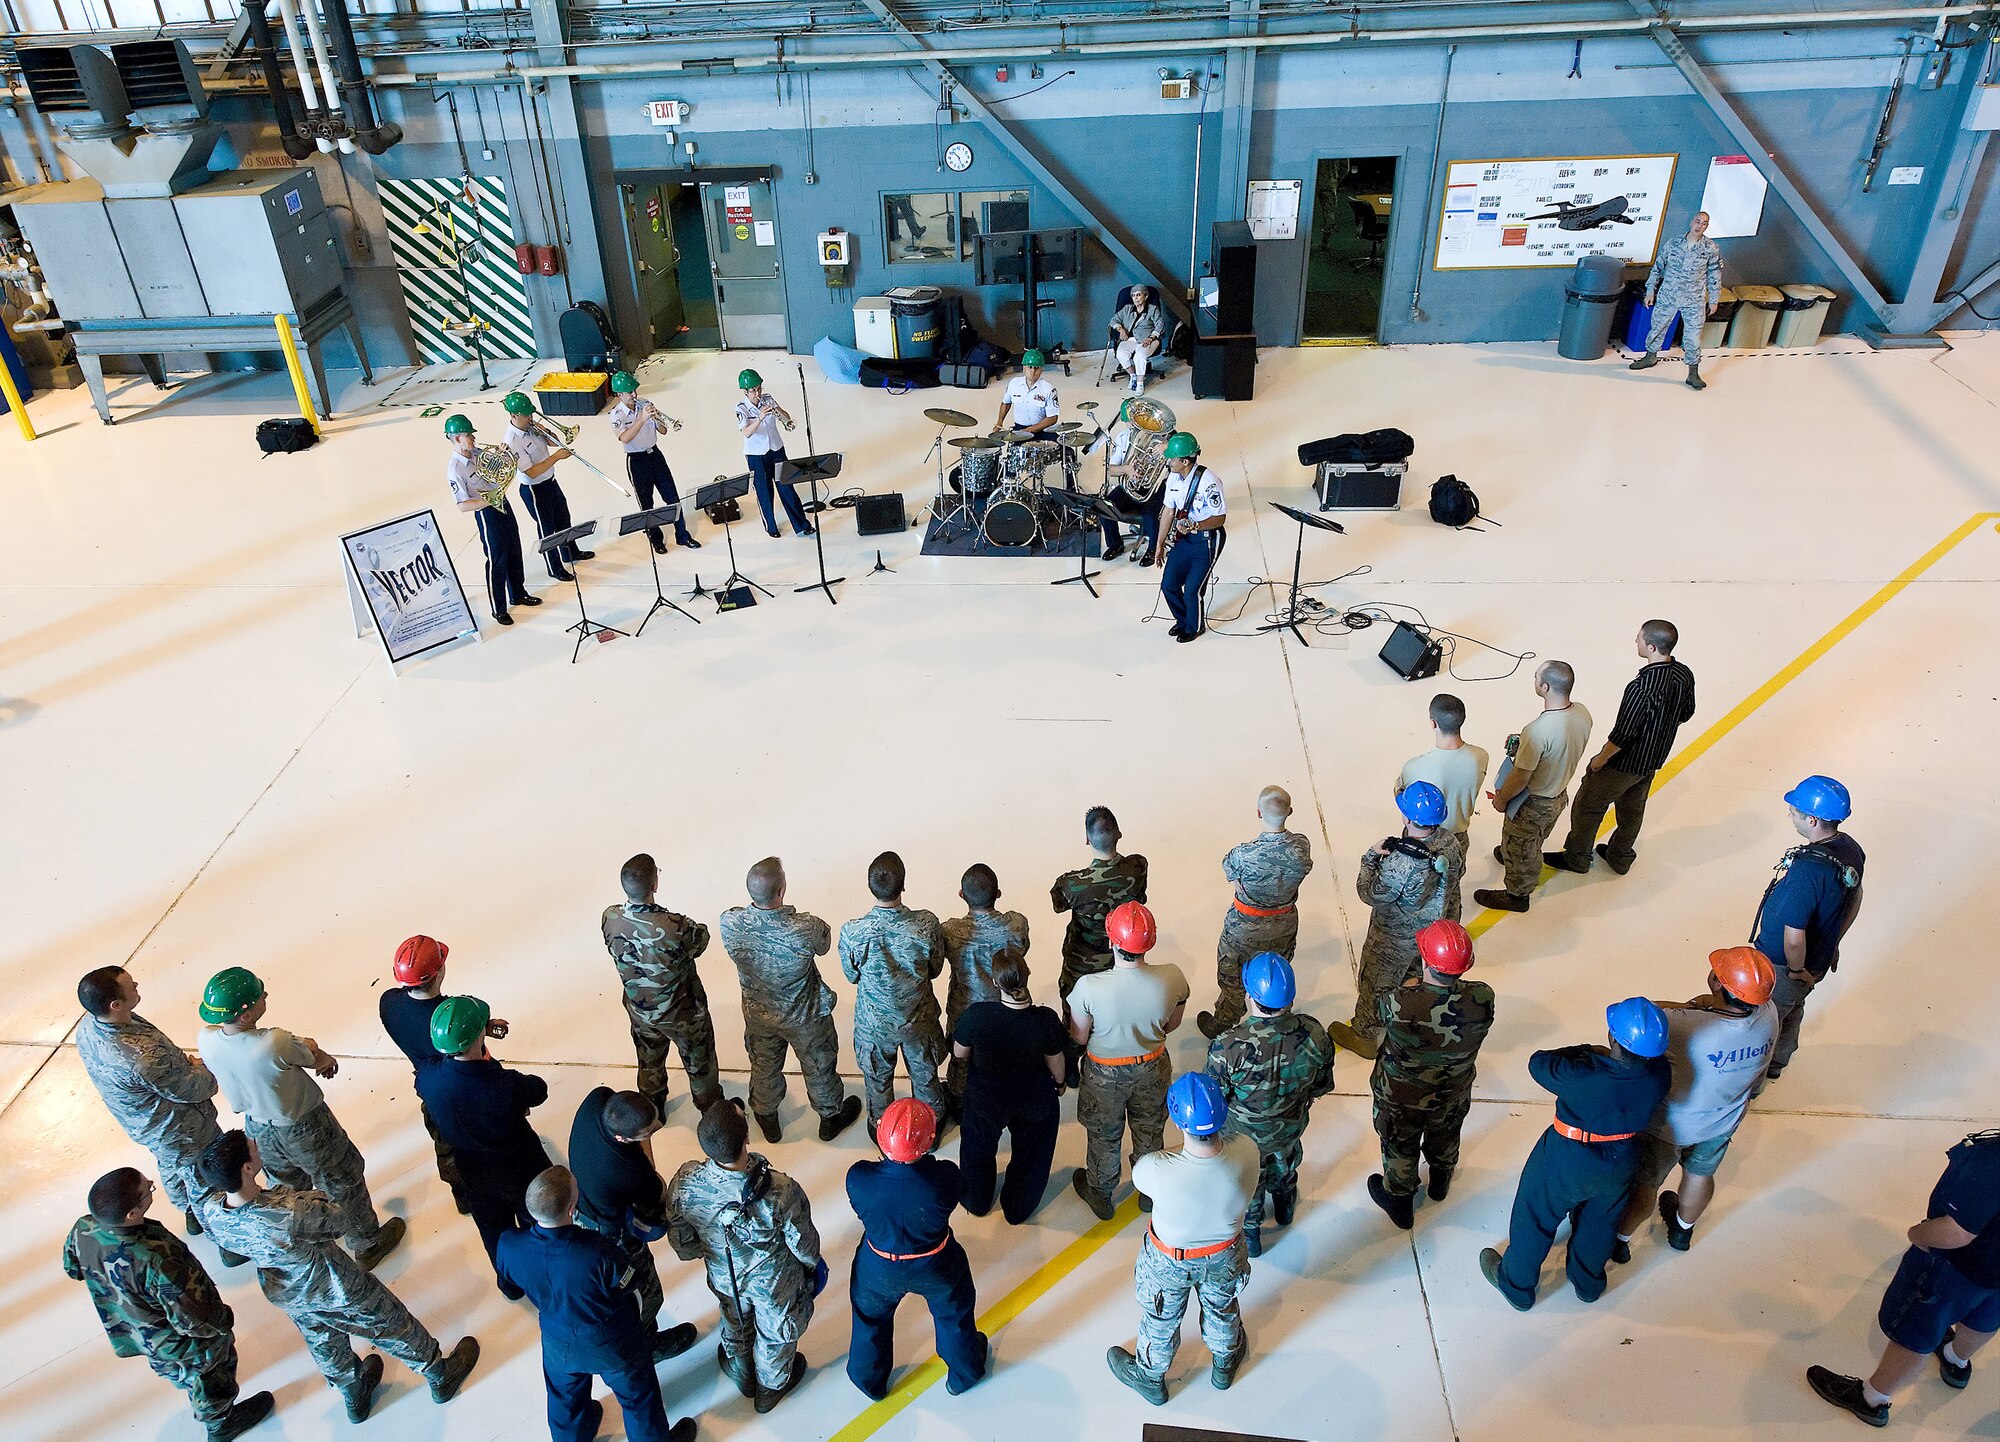 Workers in the Isochronal Inspection Dock at Dover Air Force Base, Del., listen to the msuical group Vector June 15. Vector was created in 2008 in response to the military’s growing need for mobile, troop-focused ensemble. (U.S. Air Force photo/Roland Balik)